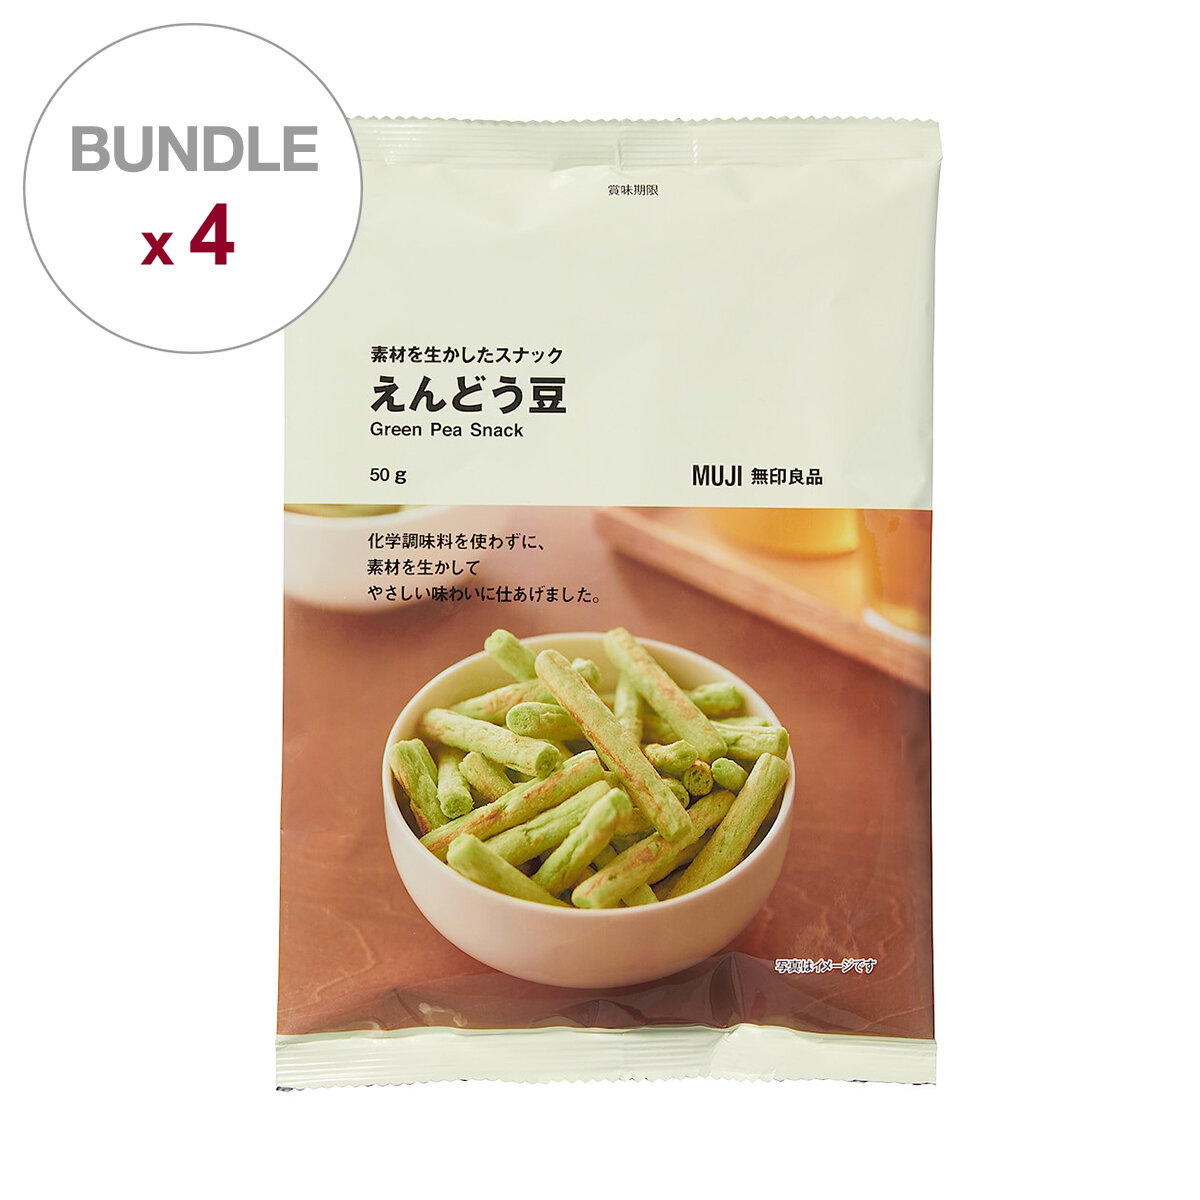 Green Pea Snack 【4 pcs】(At least 30-day serving period)